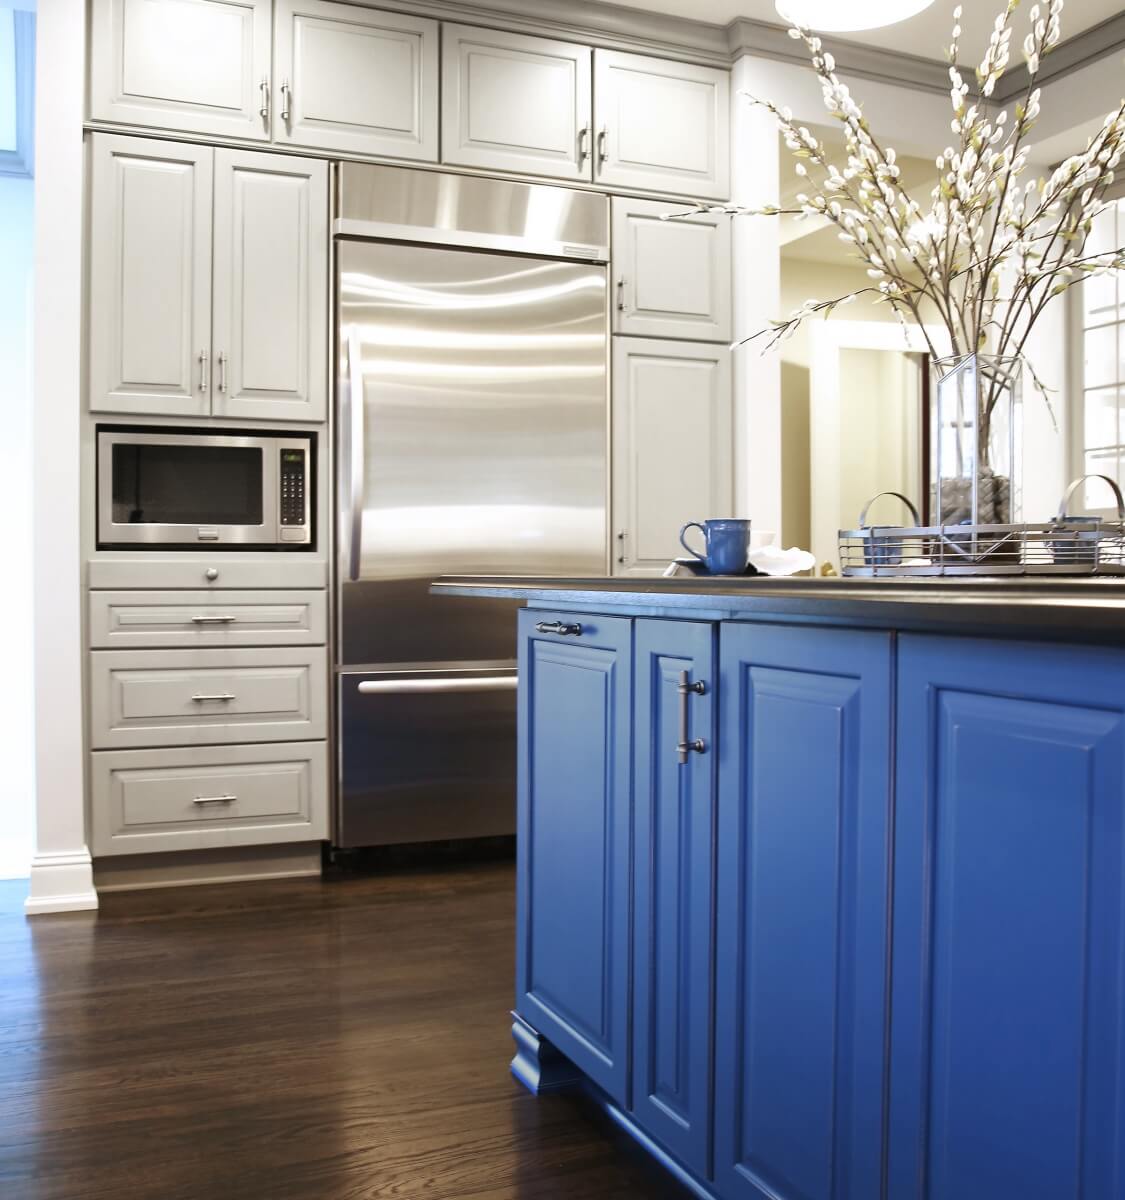 The kitchen island shown in a custom blue artisan finish by Dura Supreme Cabinetry.